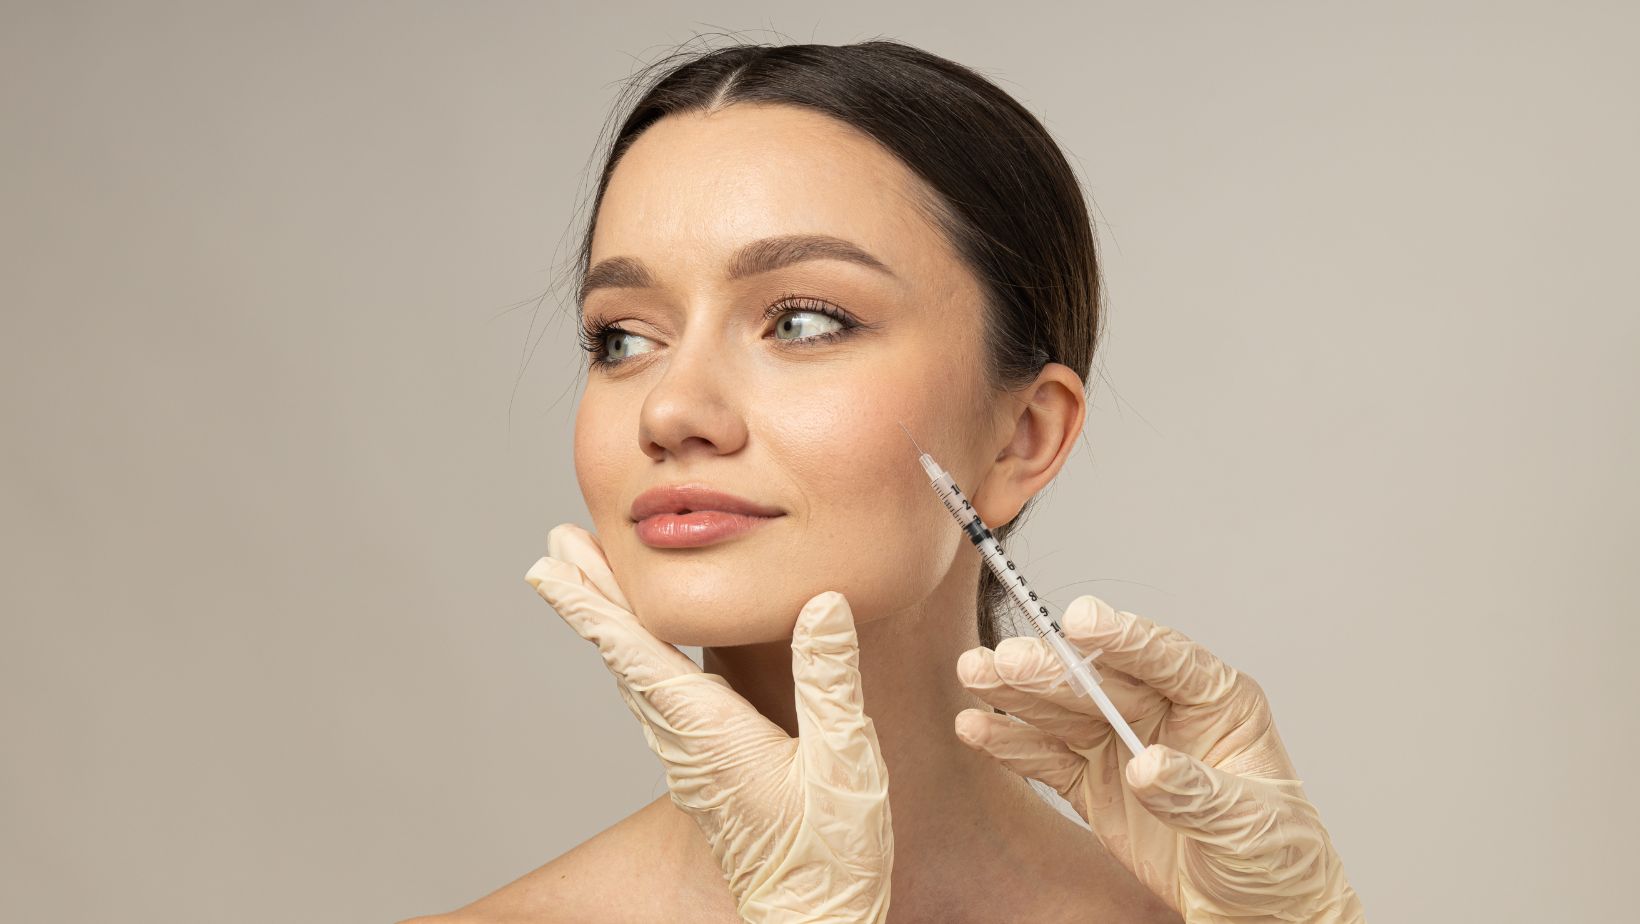 How to Effectively Prepare for a Beauty Treatment like Botox or Dermal Fillers